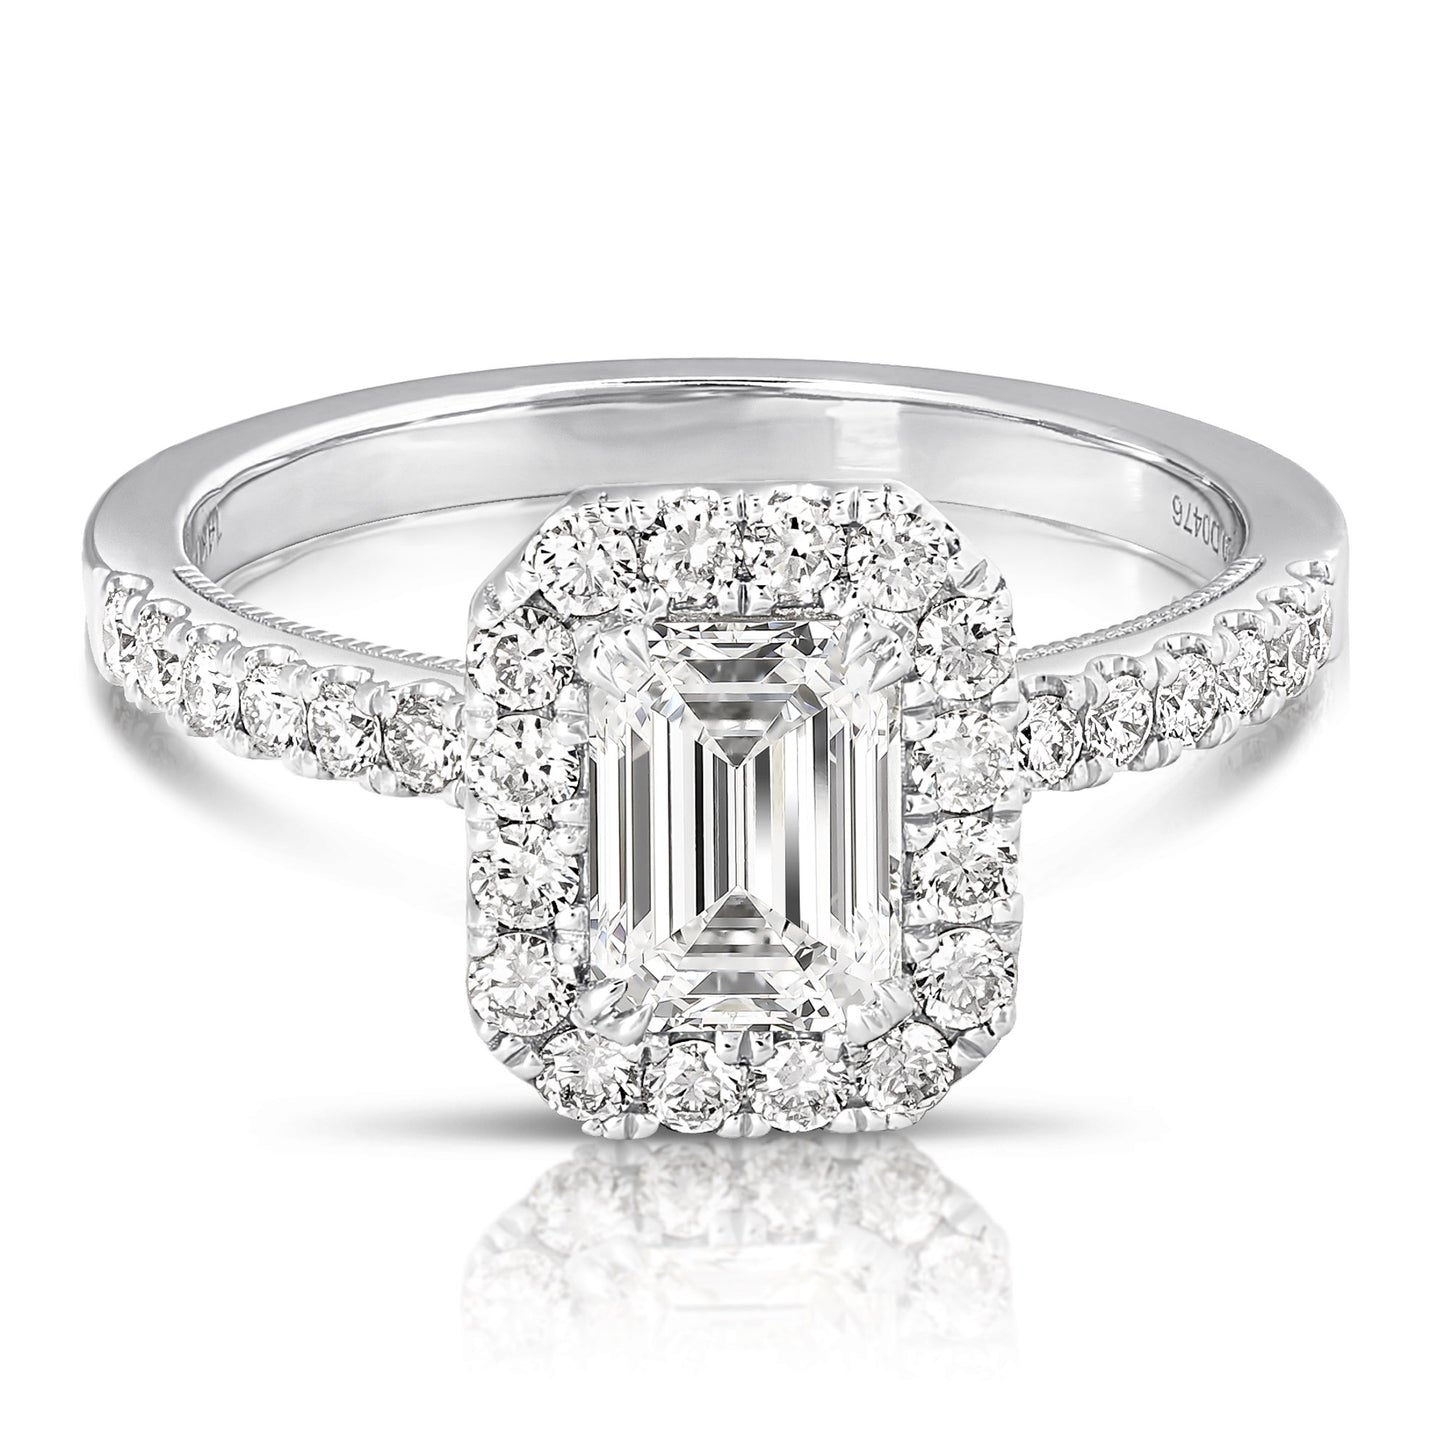 Load image into Gallery viewer, 1 1/2 CT CENTER EMERALD CUT HALO LAB GROWN ENGAGEMENT RING
